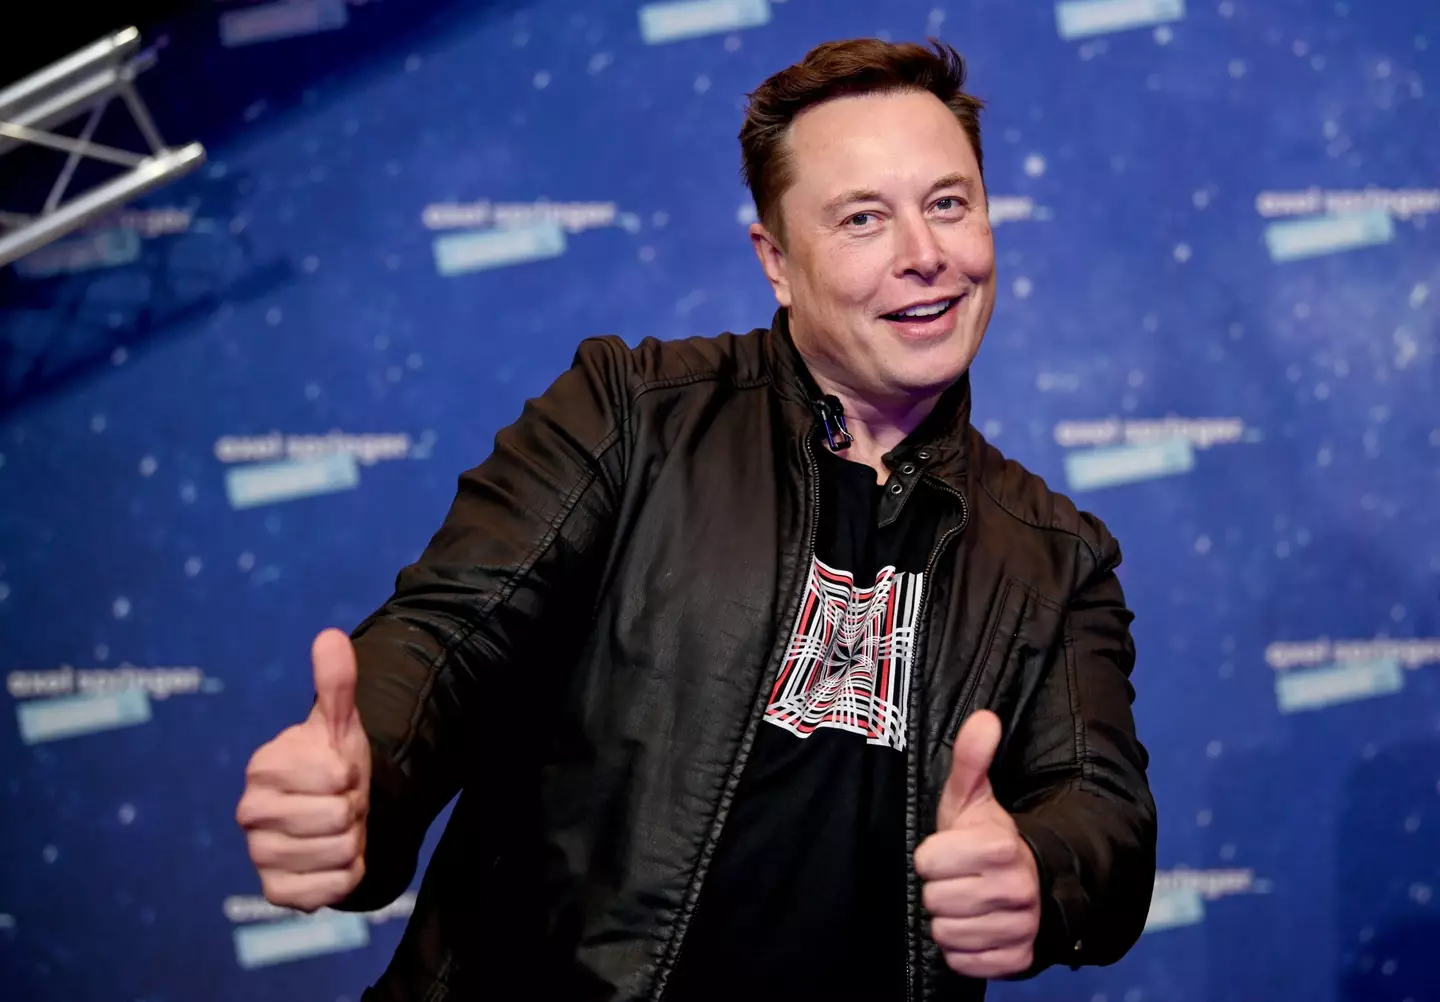 Elon Musk still seems pretty happy with how the launch went.